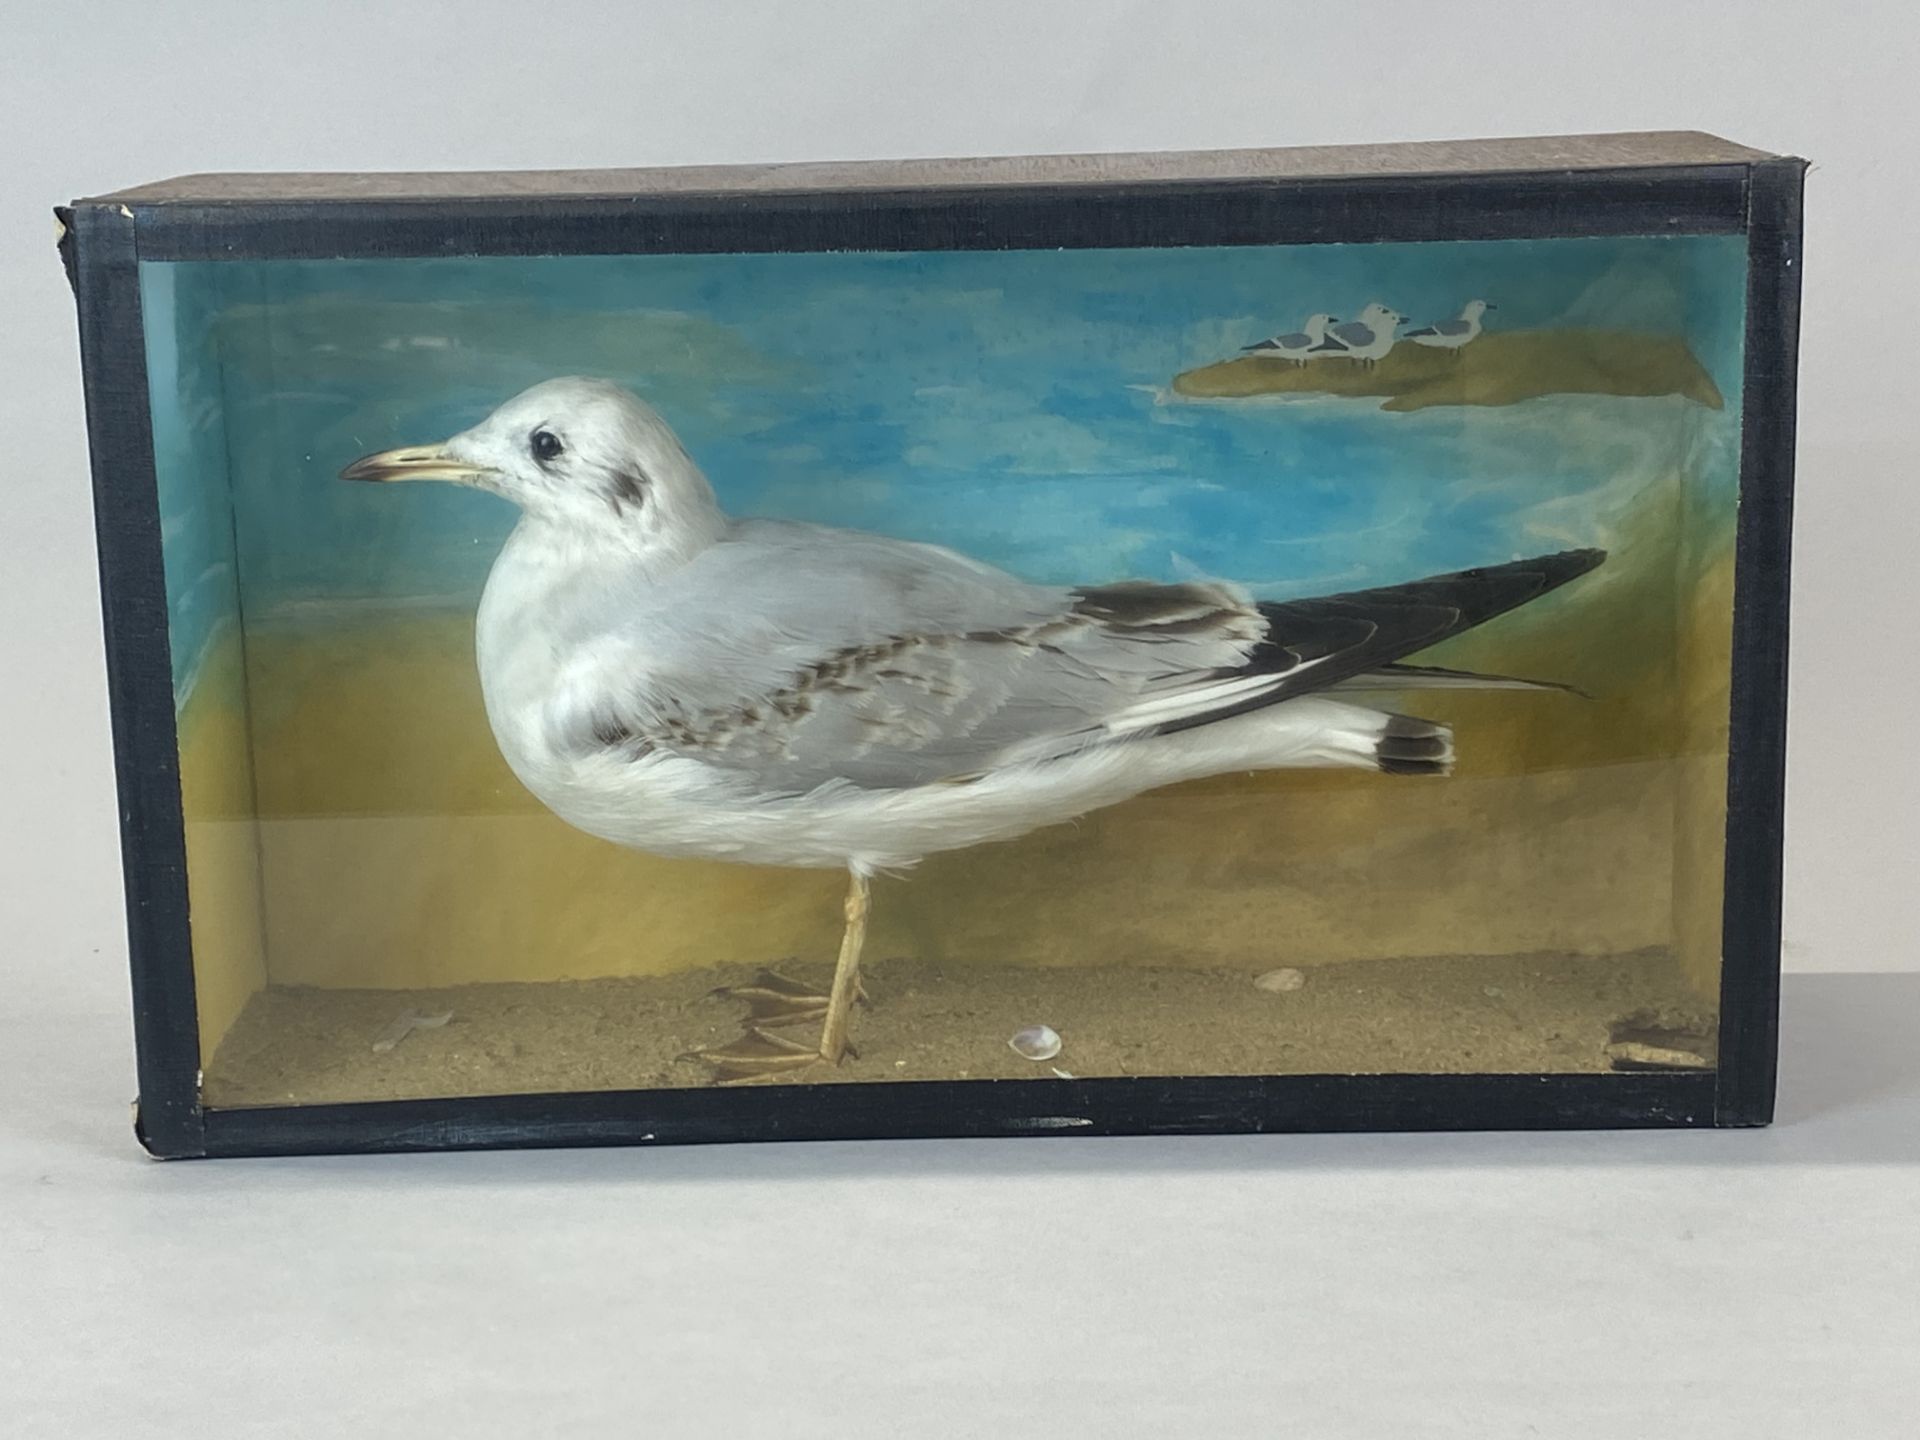 Taxidermy interest. A glass cased seagull, case 40 x 23 x 12.5cm. - Image 3 of 5